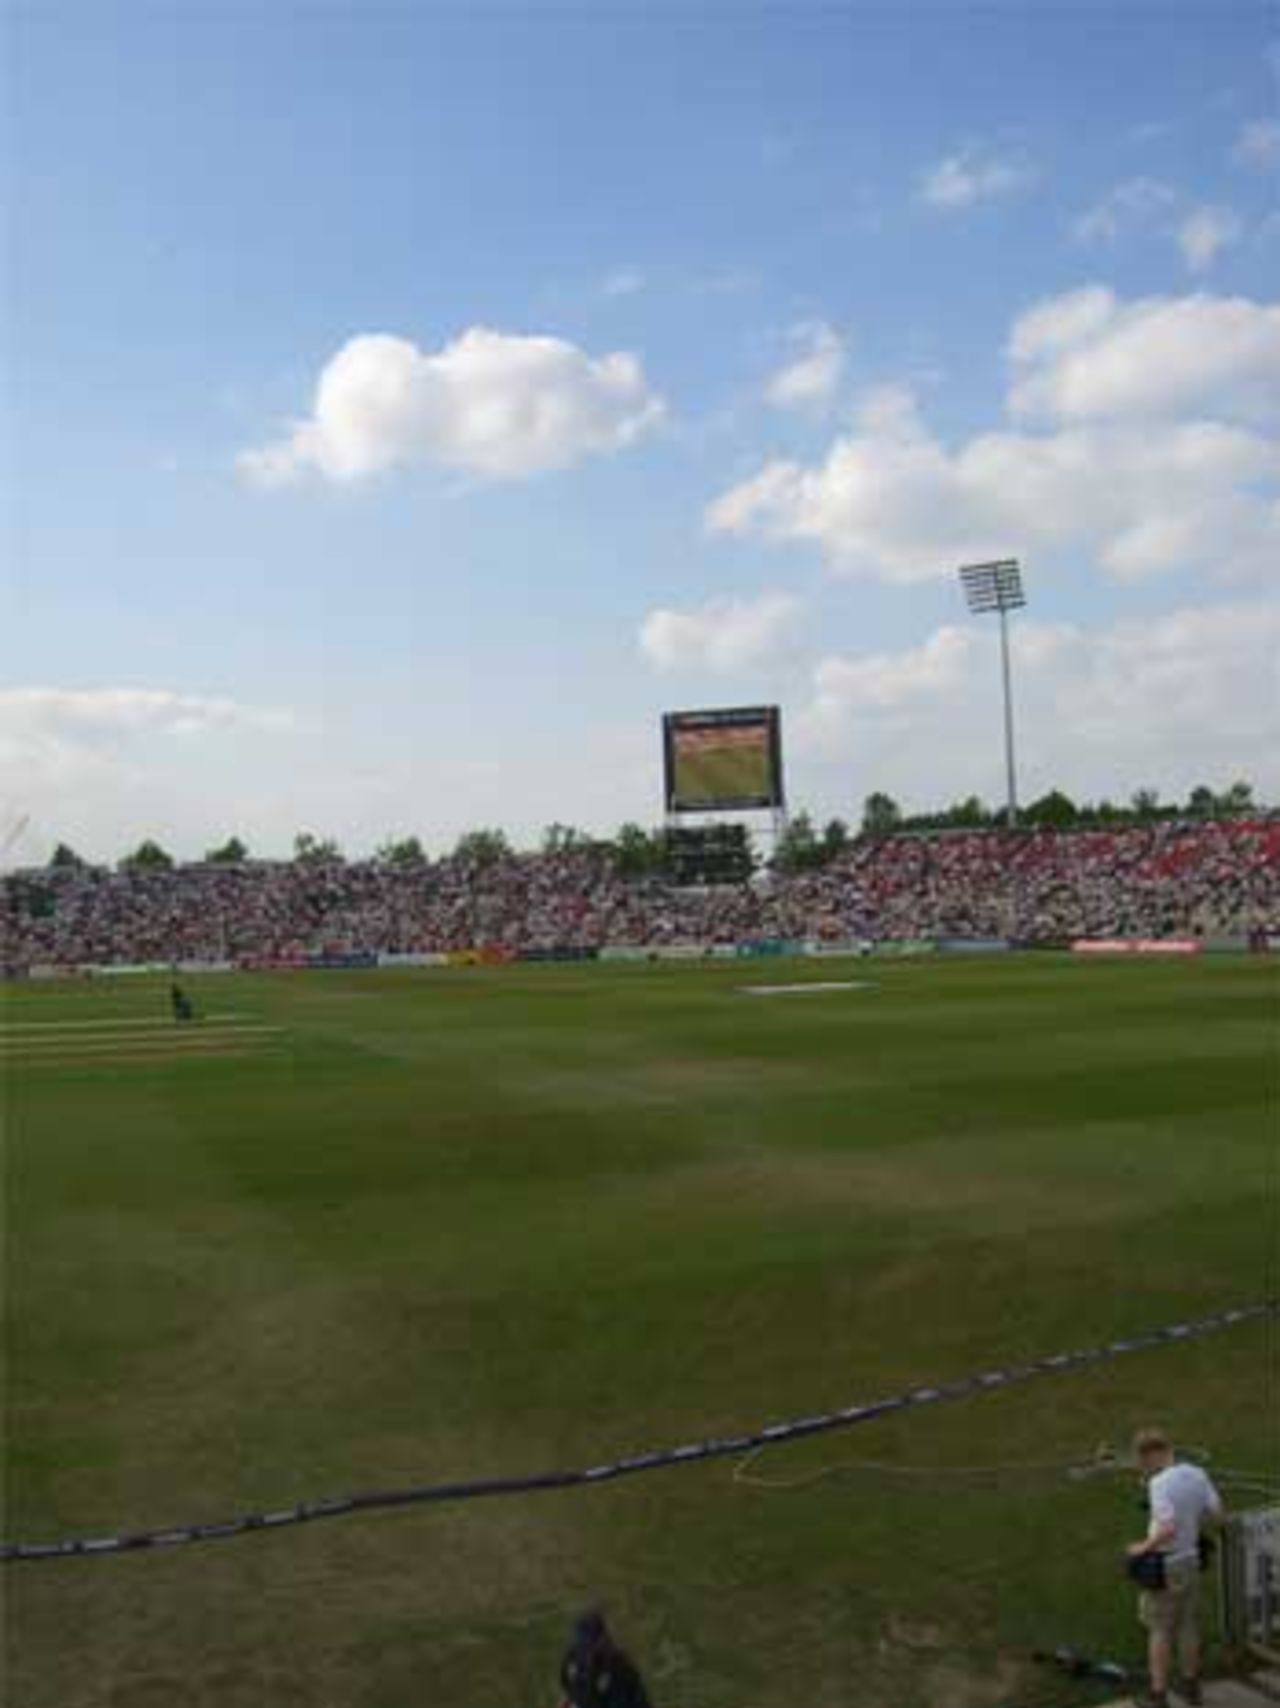 Squint or you'll miss it: the Rose Bowl crowd watches the World Cup on a tiny screen, England v Sri Lanka, Twenty20, Southampton, June 15, 2006